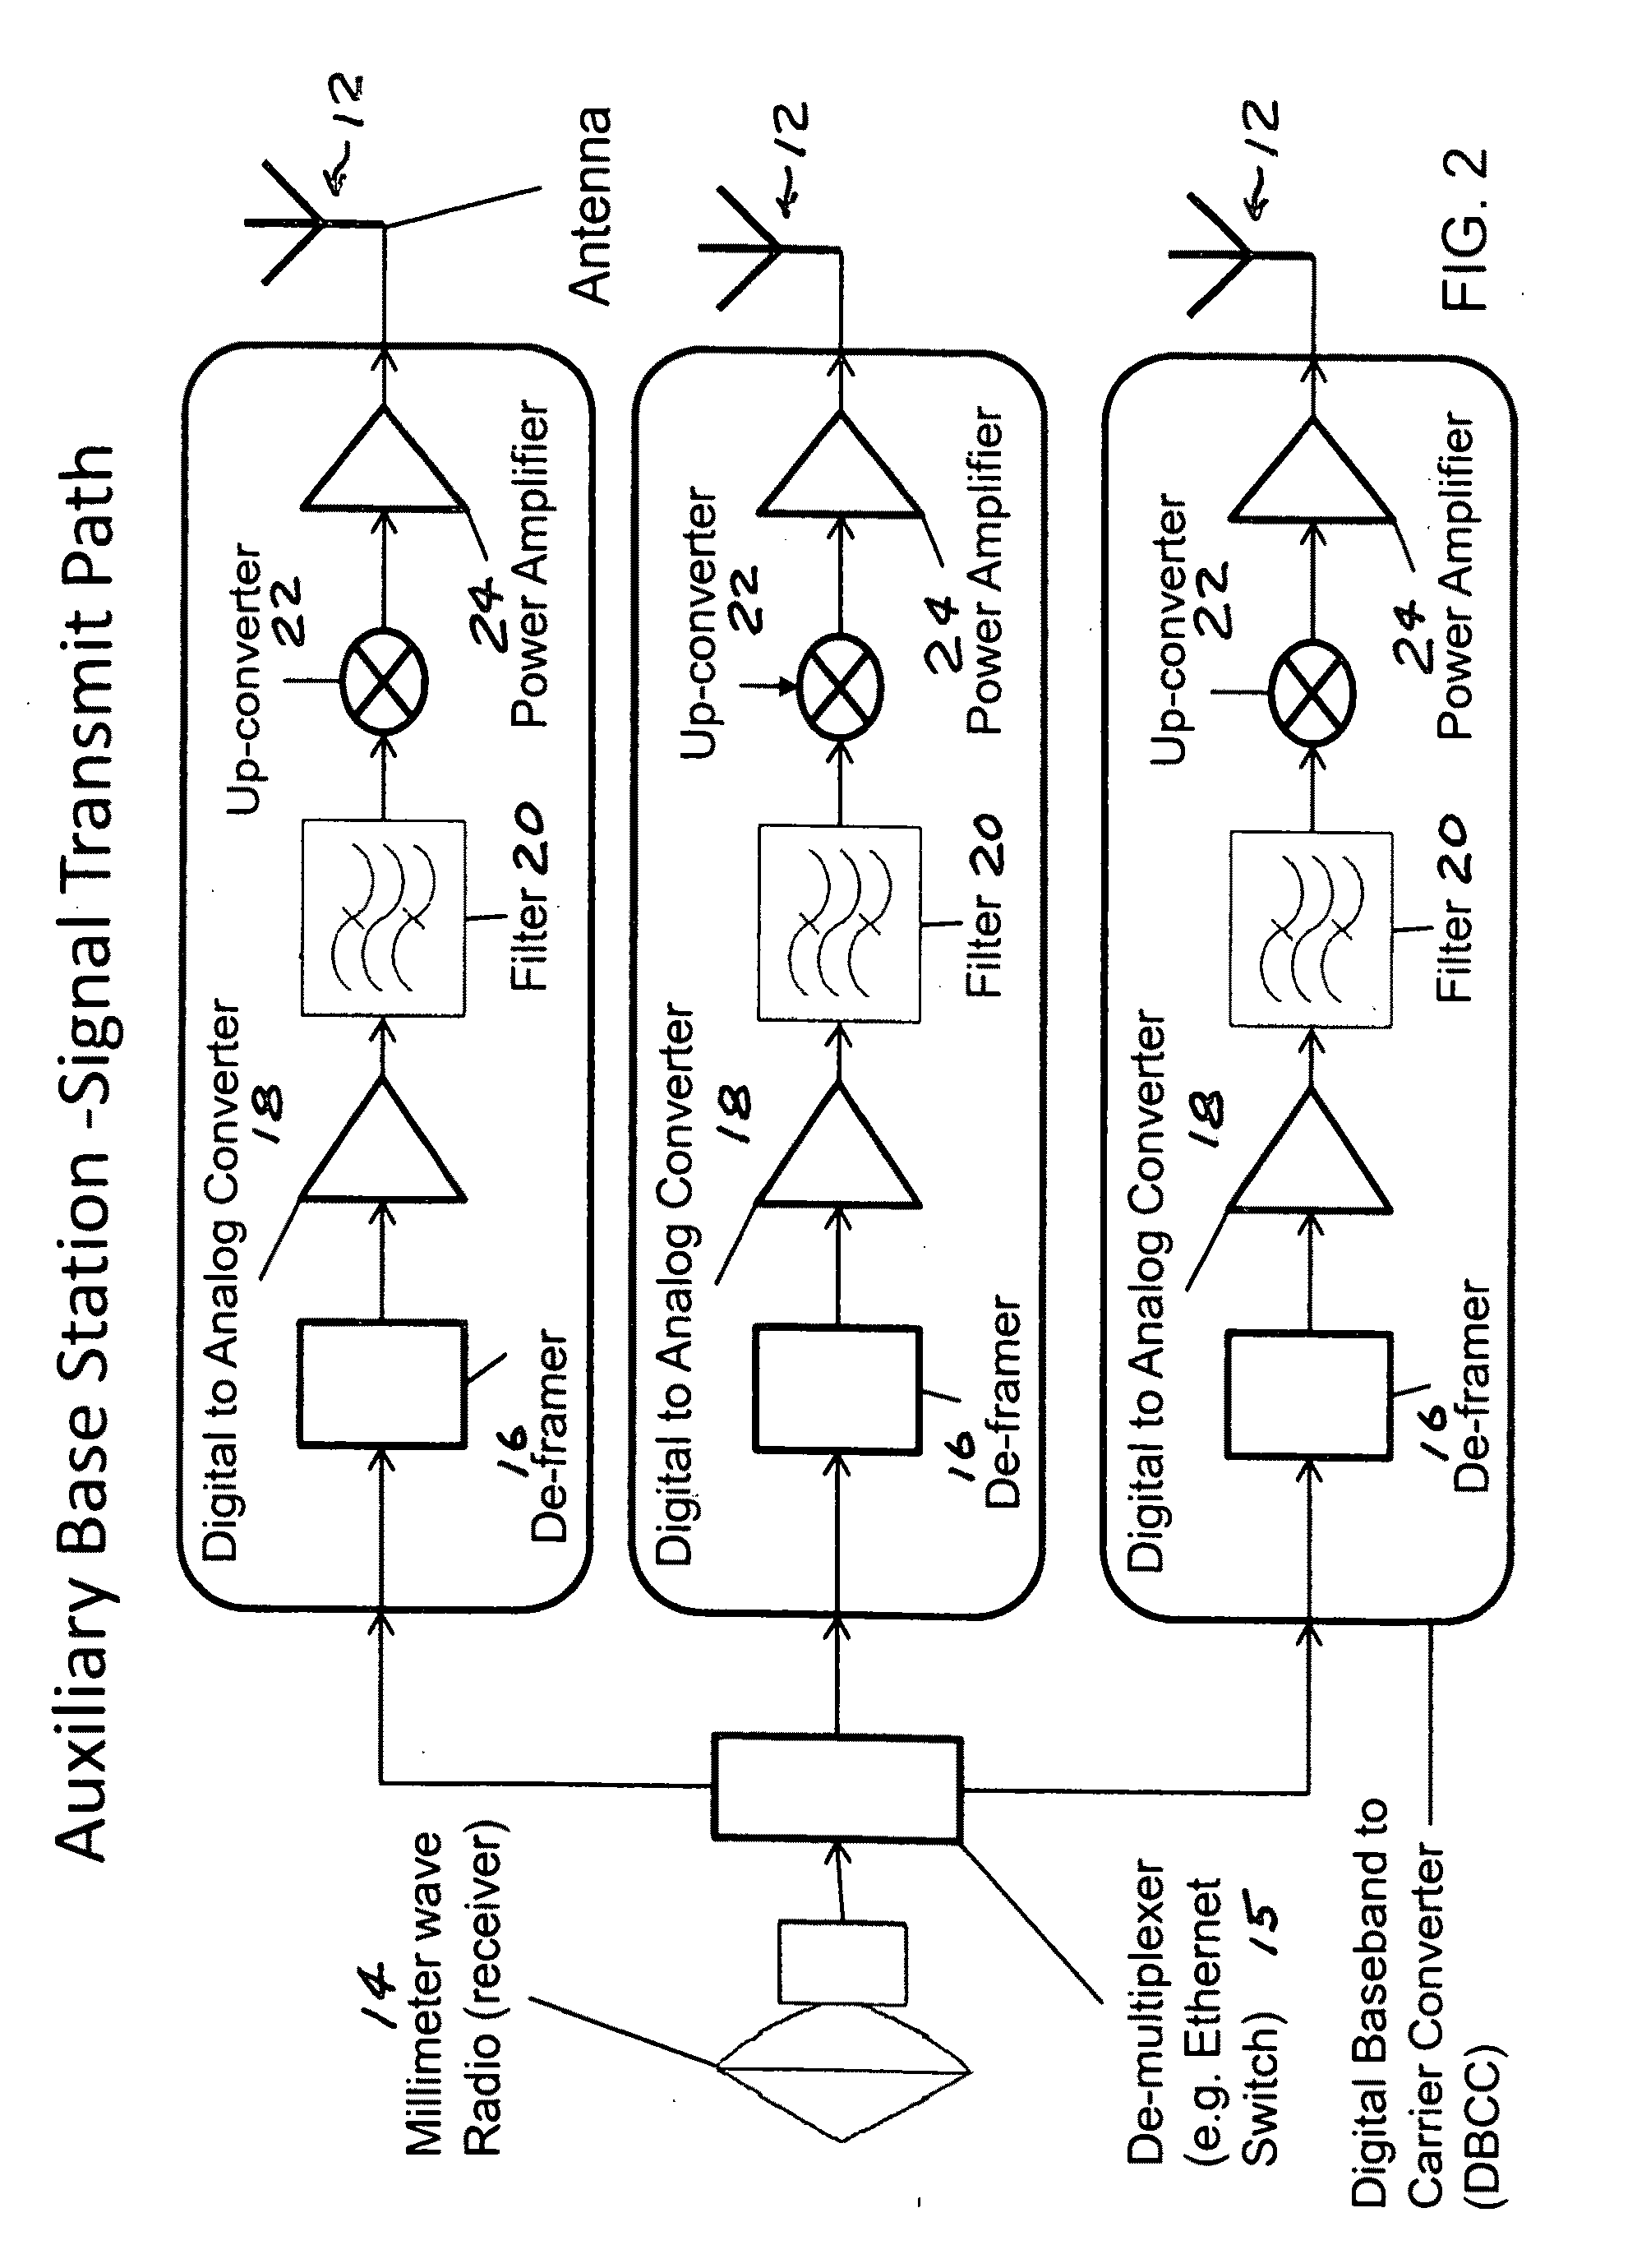 Bandwidth allocation and management system for cellular networks